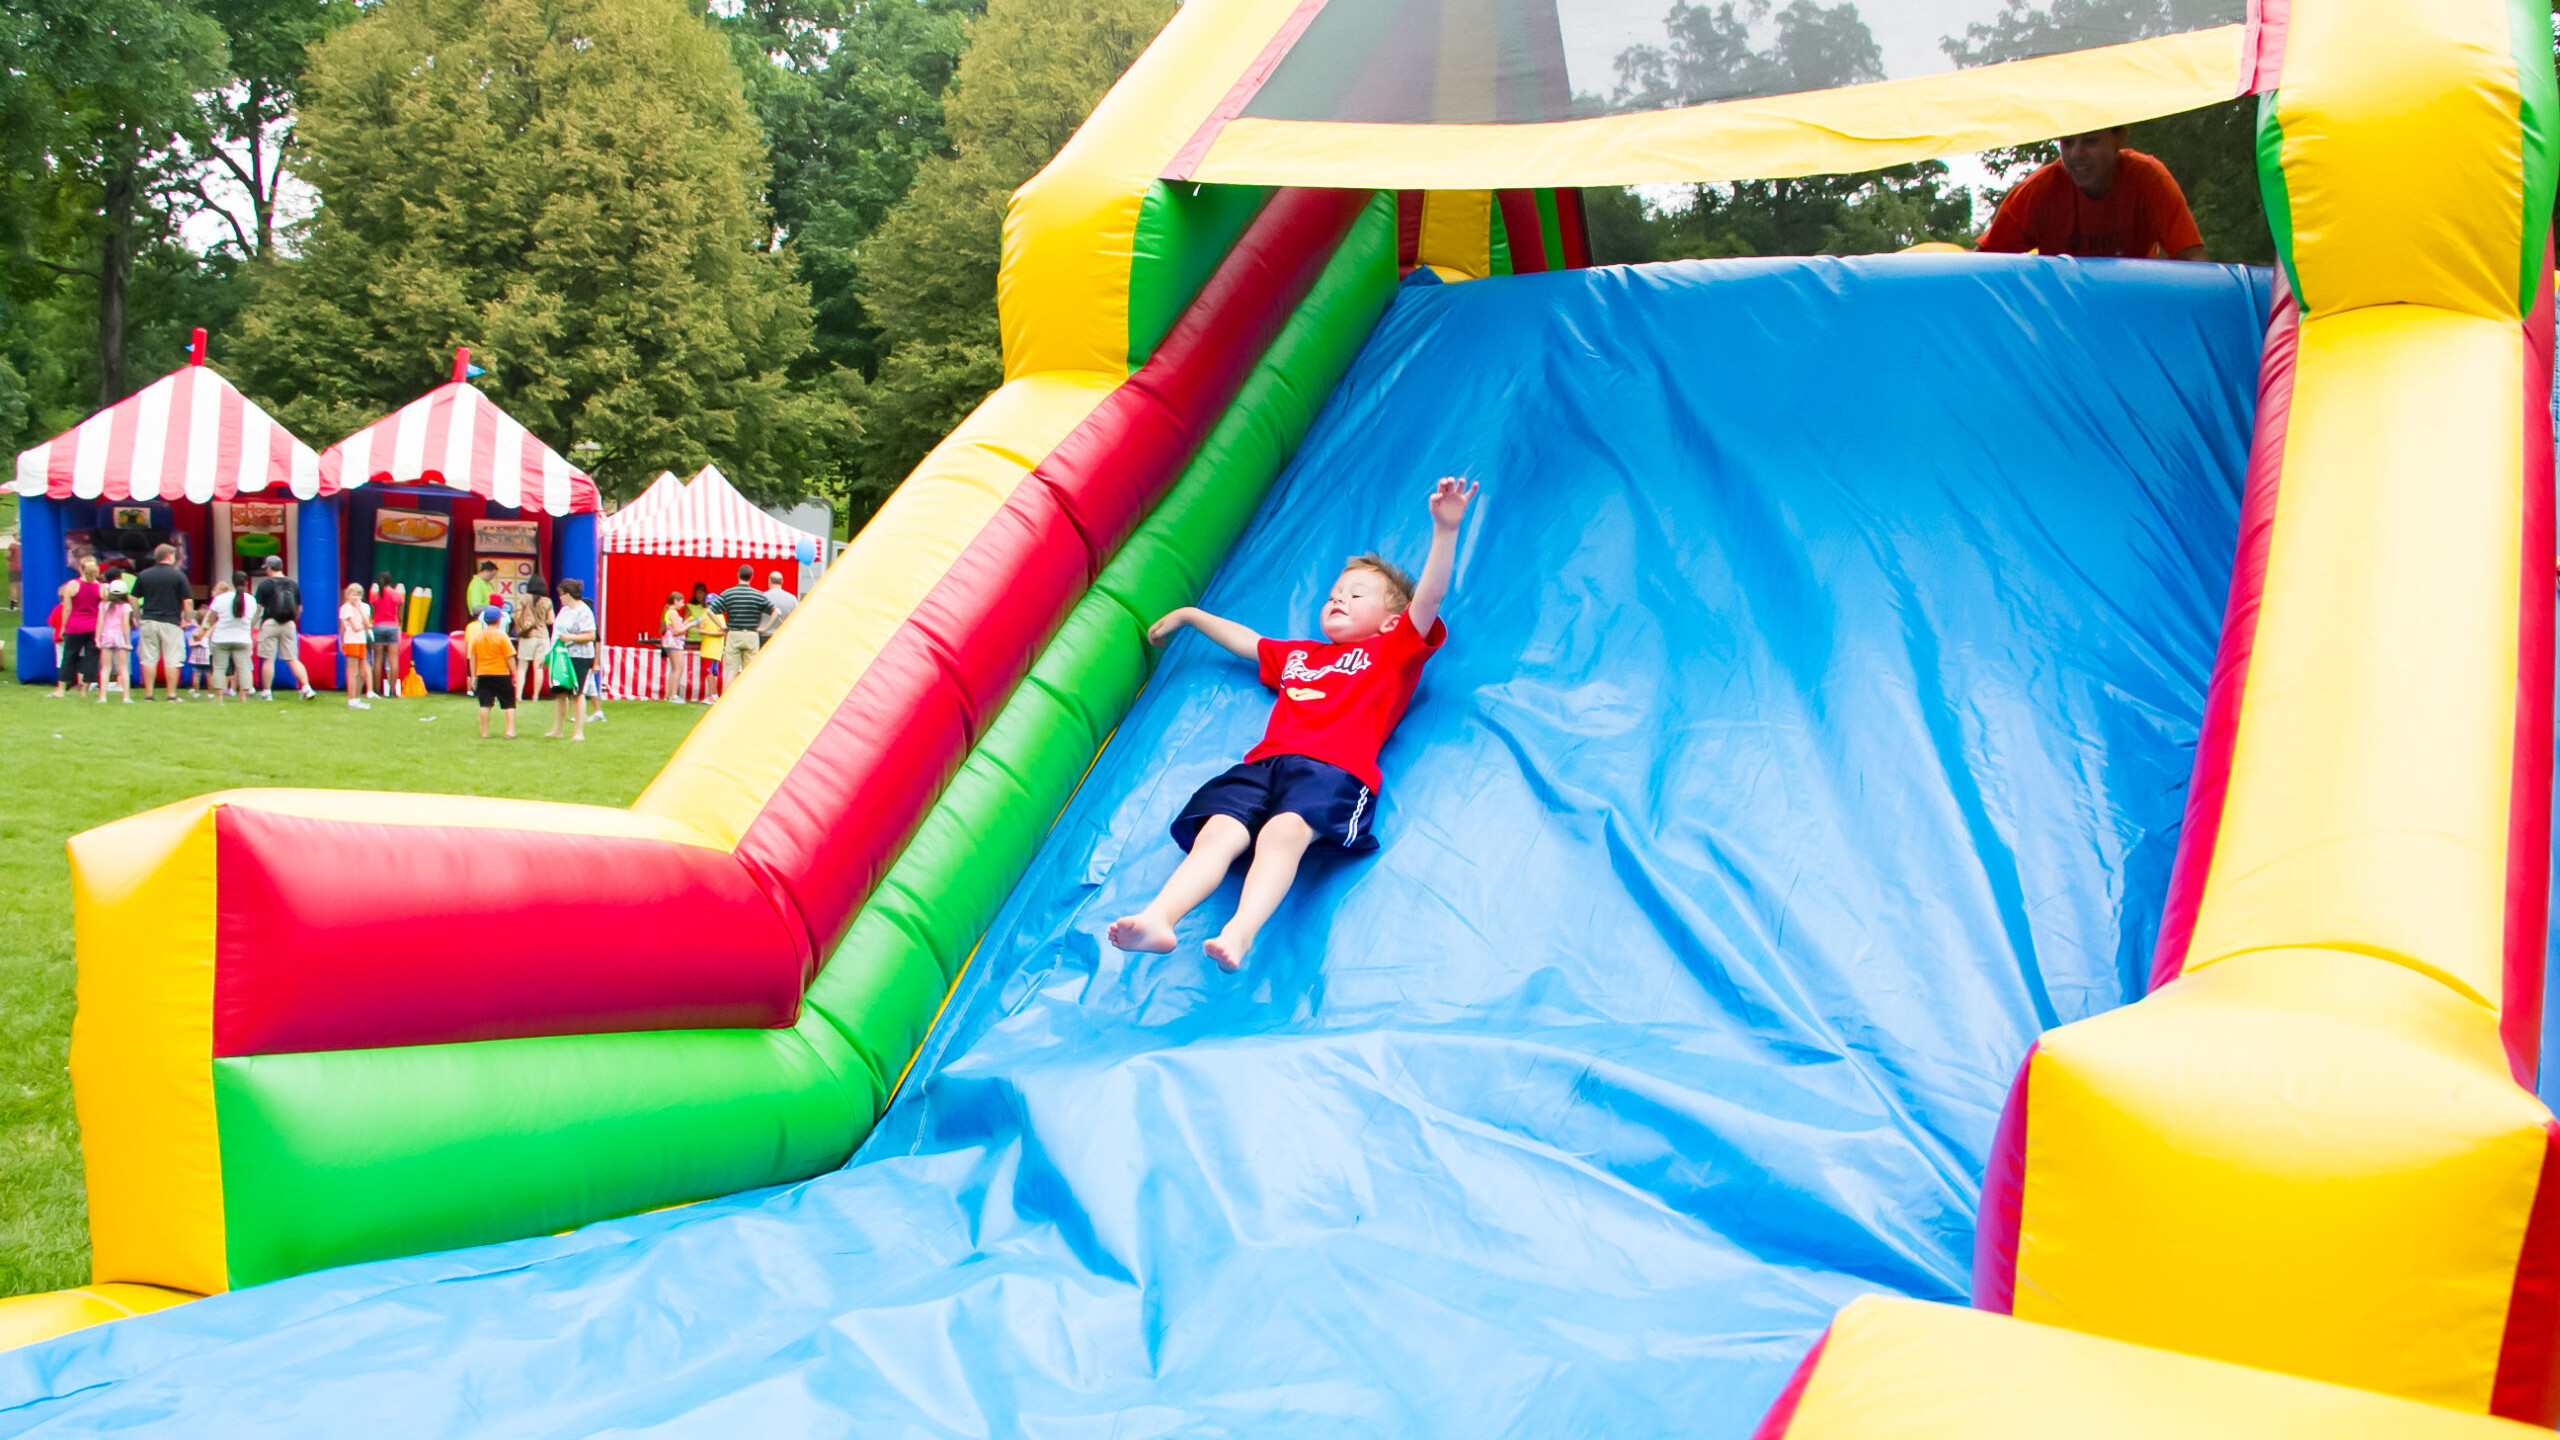 A kid closing his eyes as he slides down an inflatable slide at a festival.